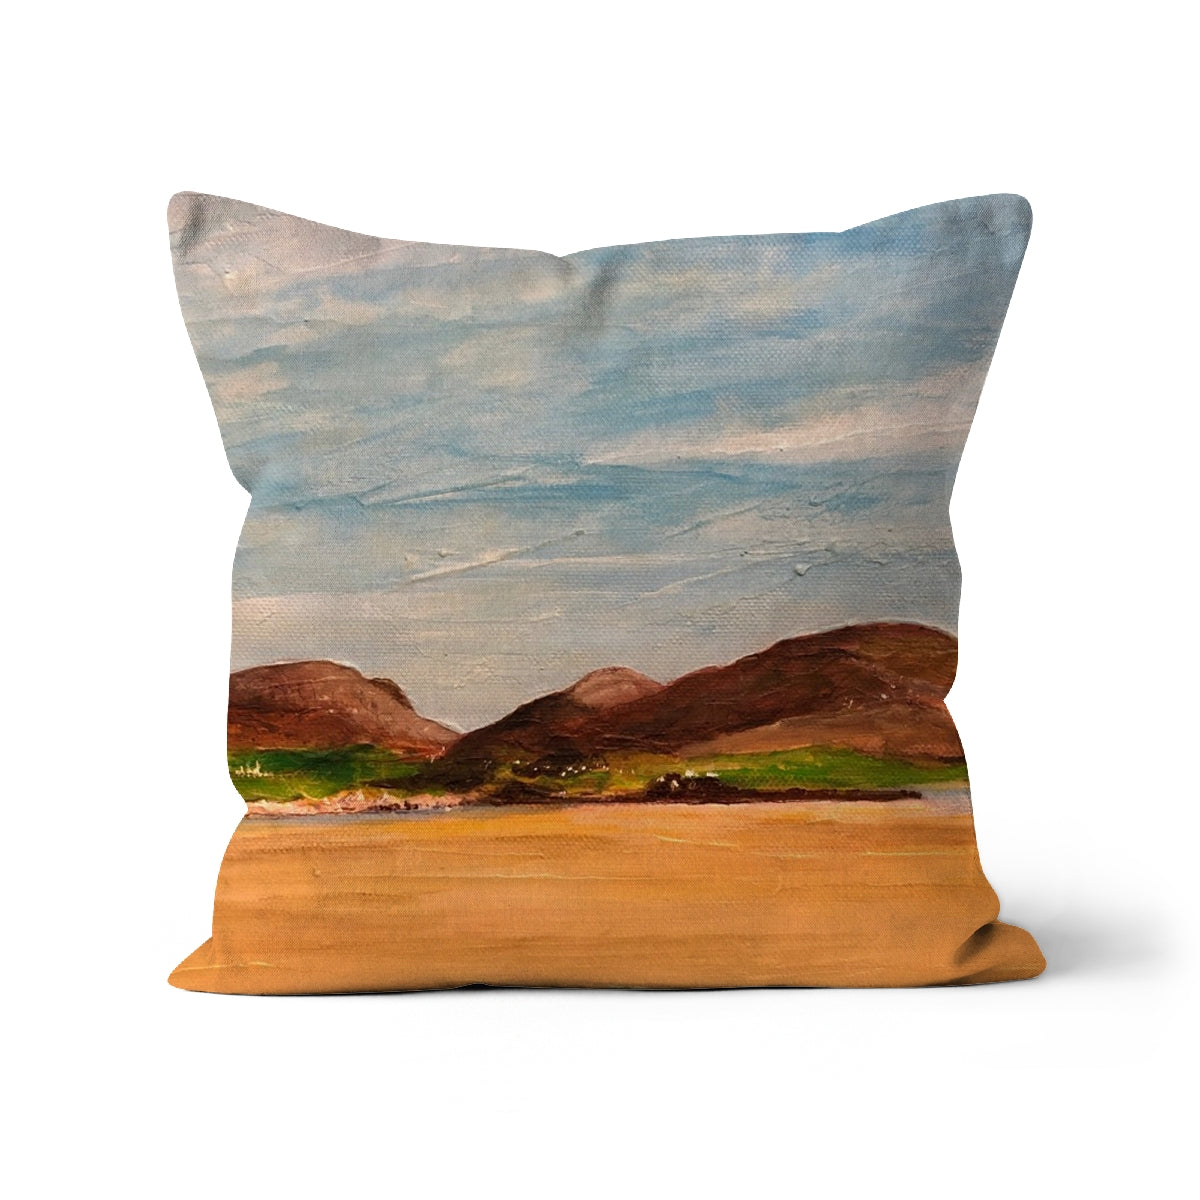 Uig Sands Lewis Art Gifts Cushion-Cushions-Hebridean Islands Art Gallery-Canvas-22"x22"-Paintings, Prints, Homeware, Art Gifts From Scotland By Scottish Artist Kevin Hunter